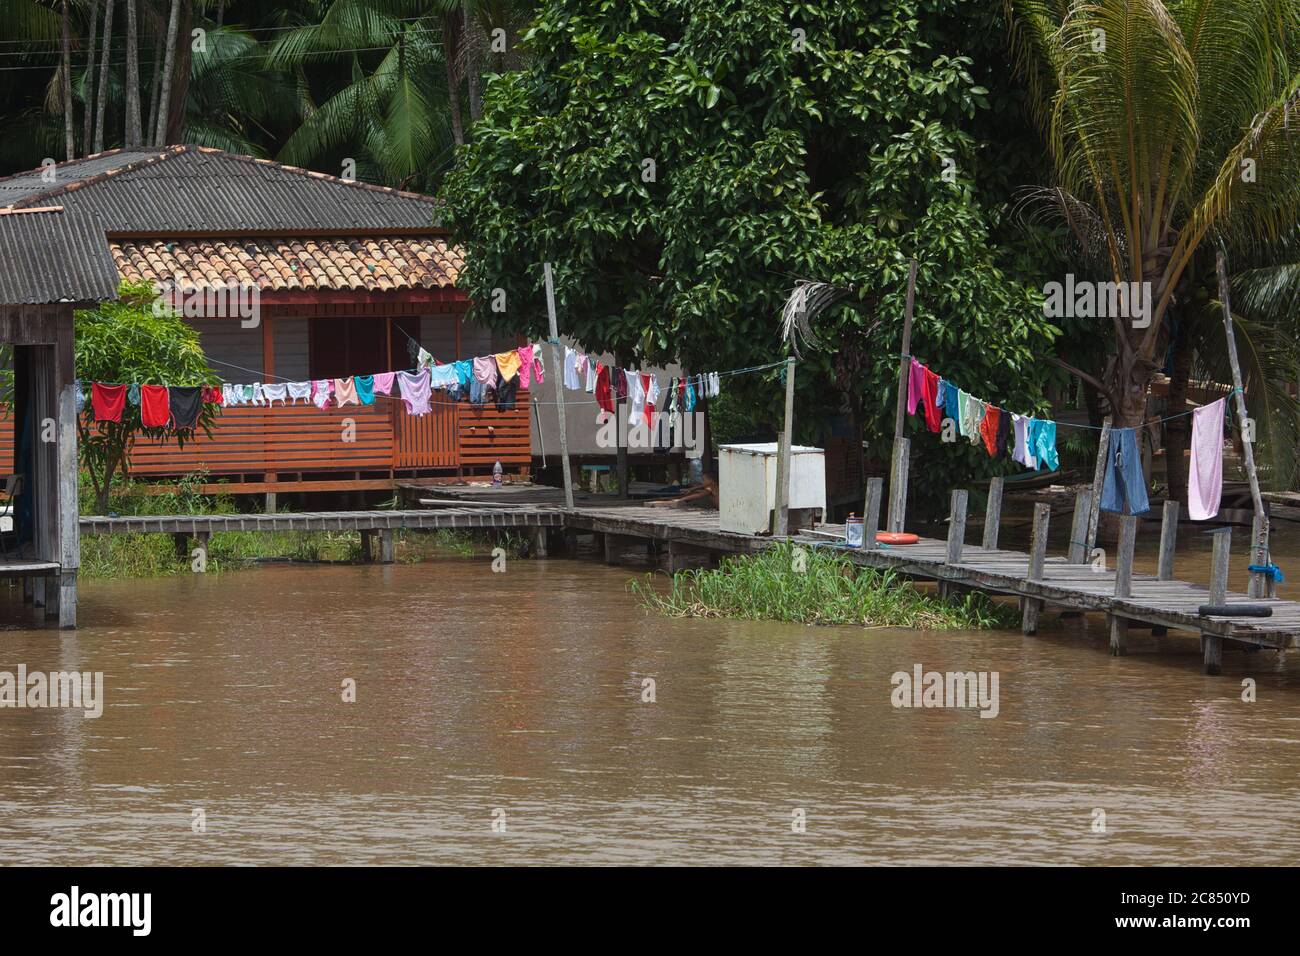 A typical house on stilts and jetty with washing lines hanging, on the banks of the River Amazon near Macapa in Amapa State, Brazil Stock Photo